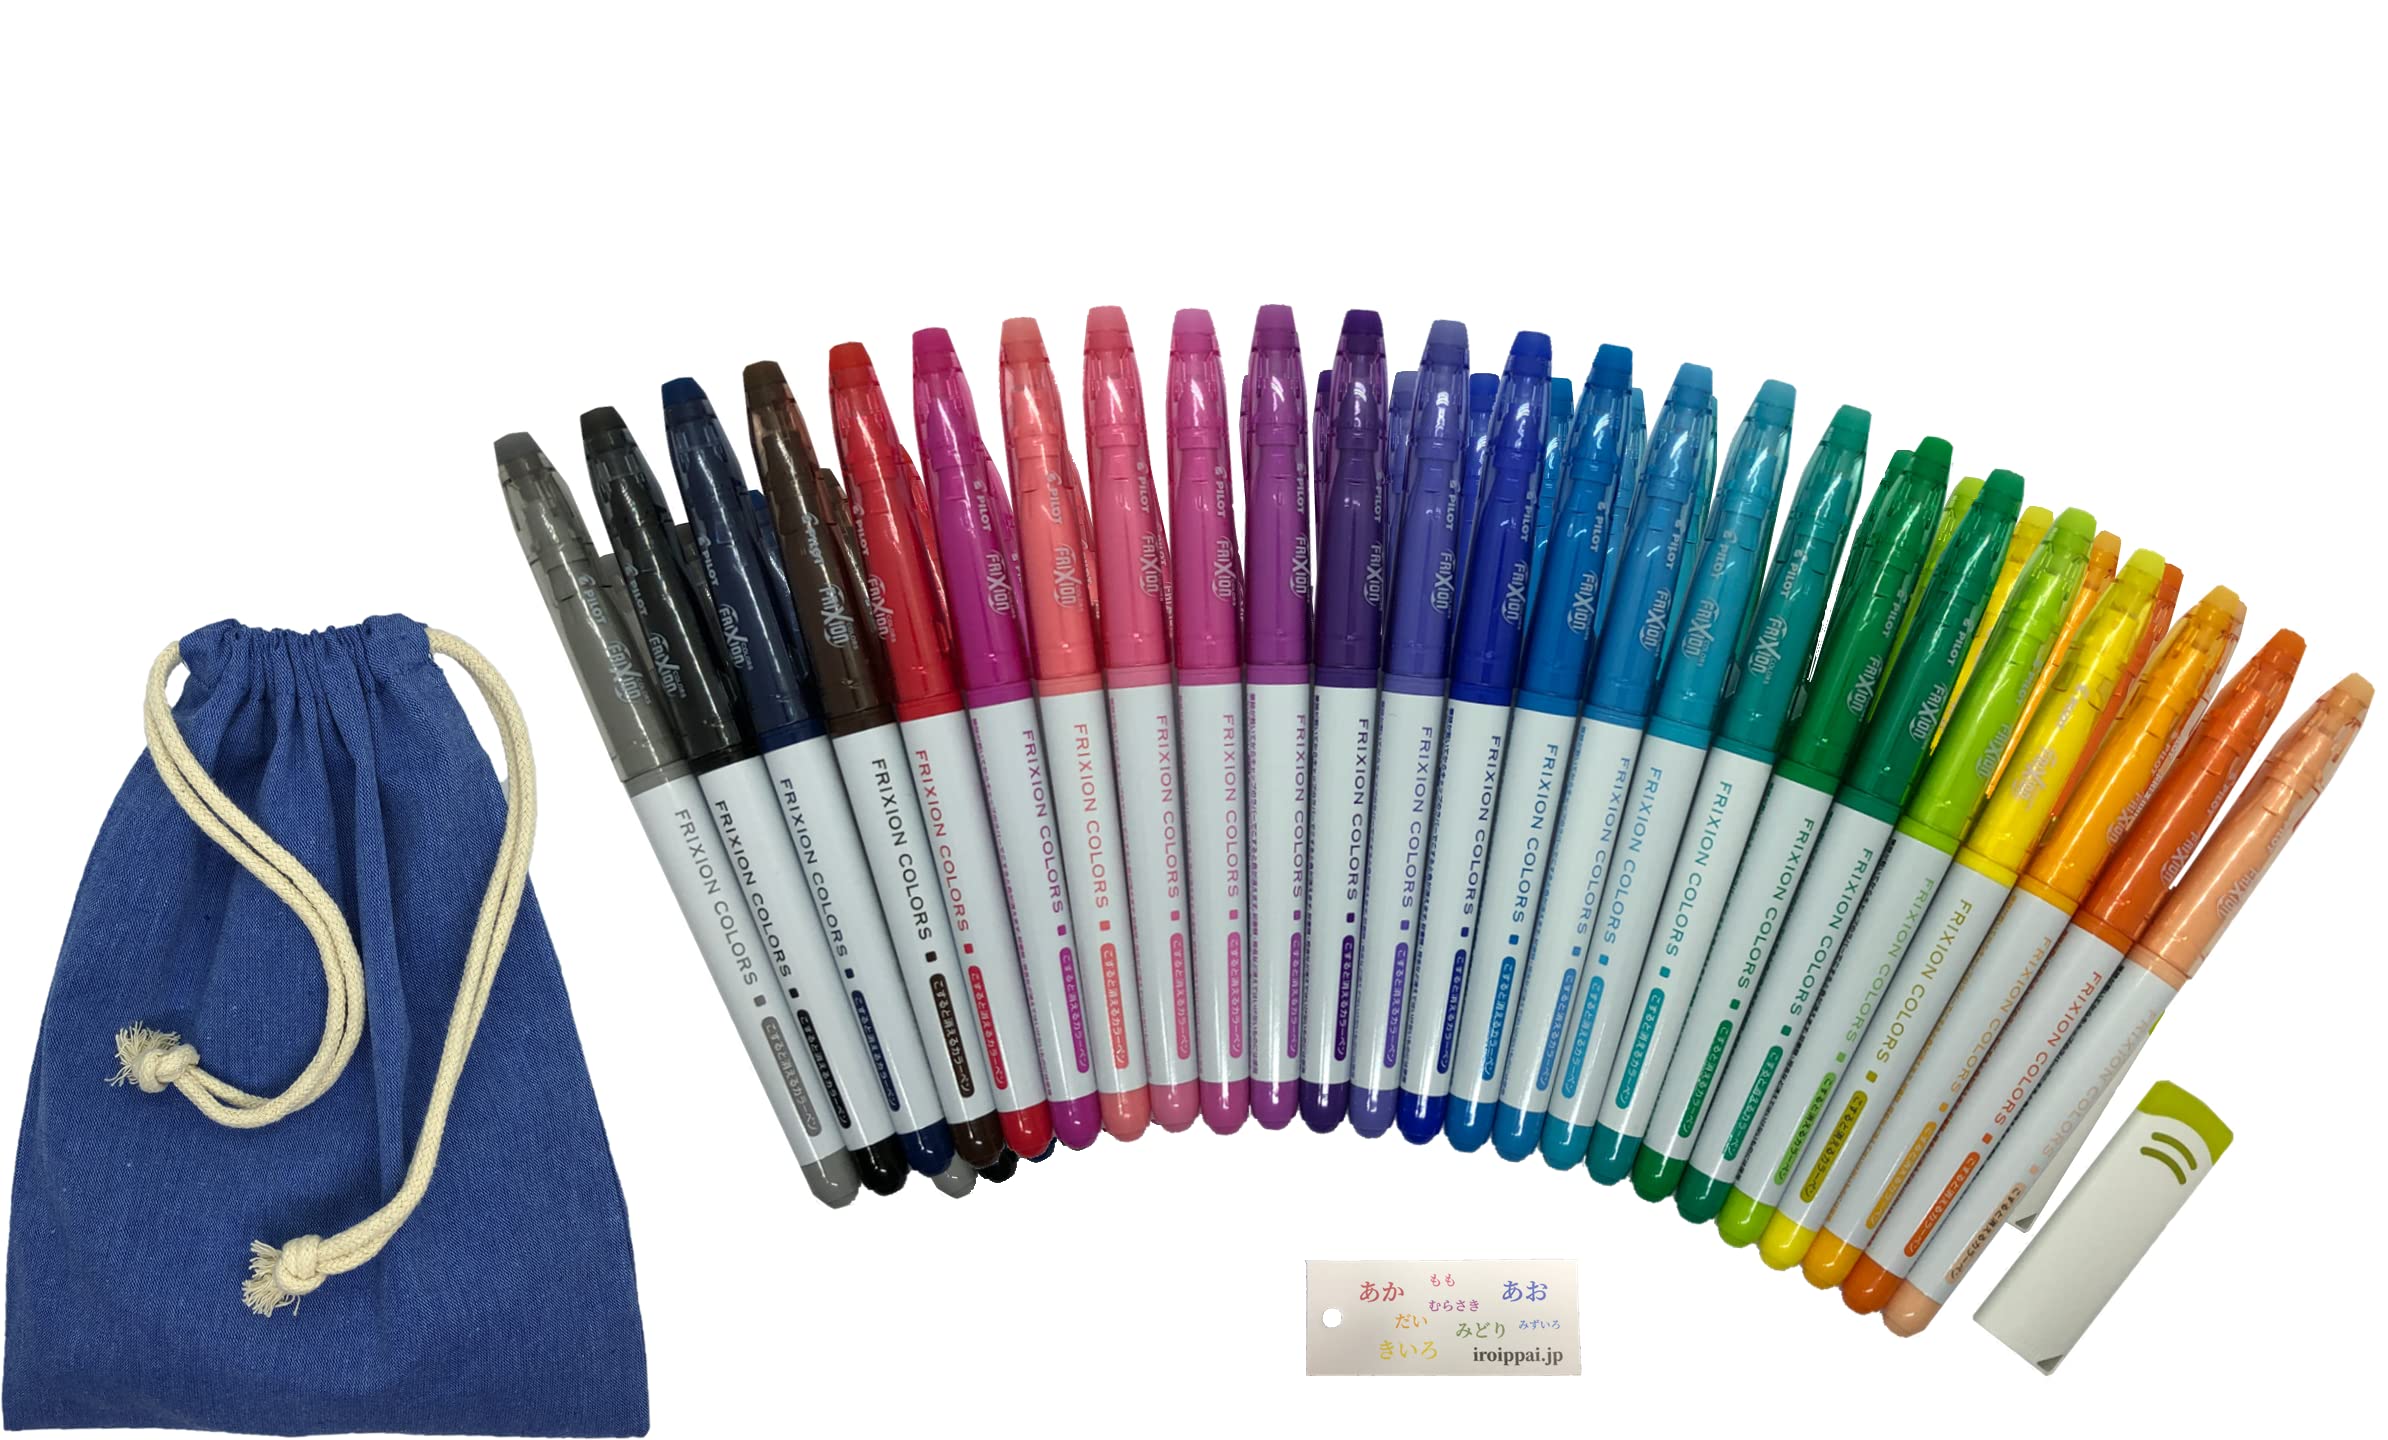 KTDY Pilot FriXion Colors Erasable Markers 24 Colors Eraser set (24Colors  with a pouch) Black Red Blue Green Soft Light Pink Baby Orange Yellow  Violet Brown Gray Pale Honey Forest Emerald Sky